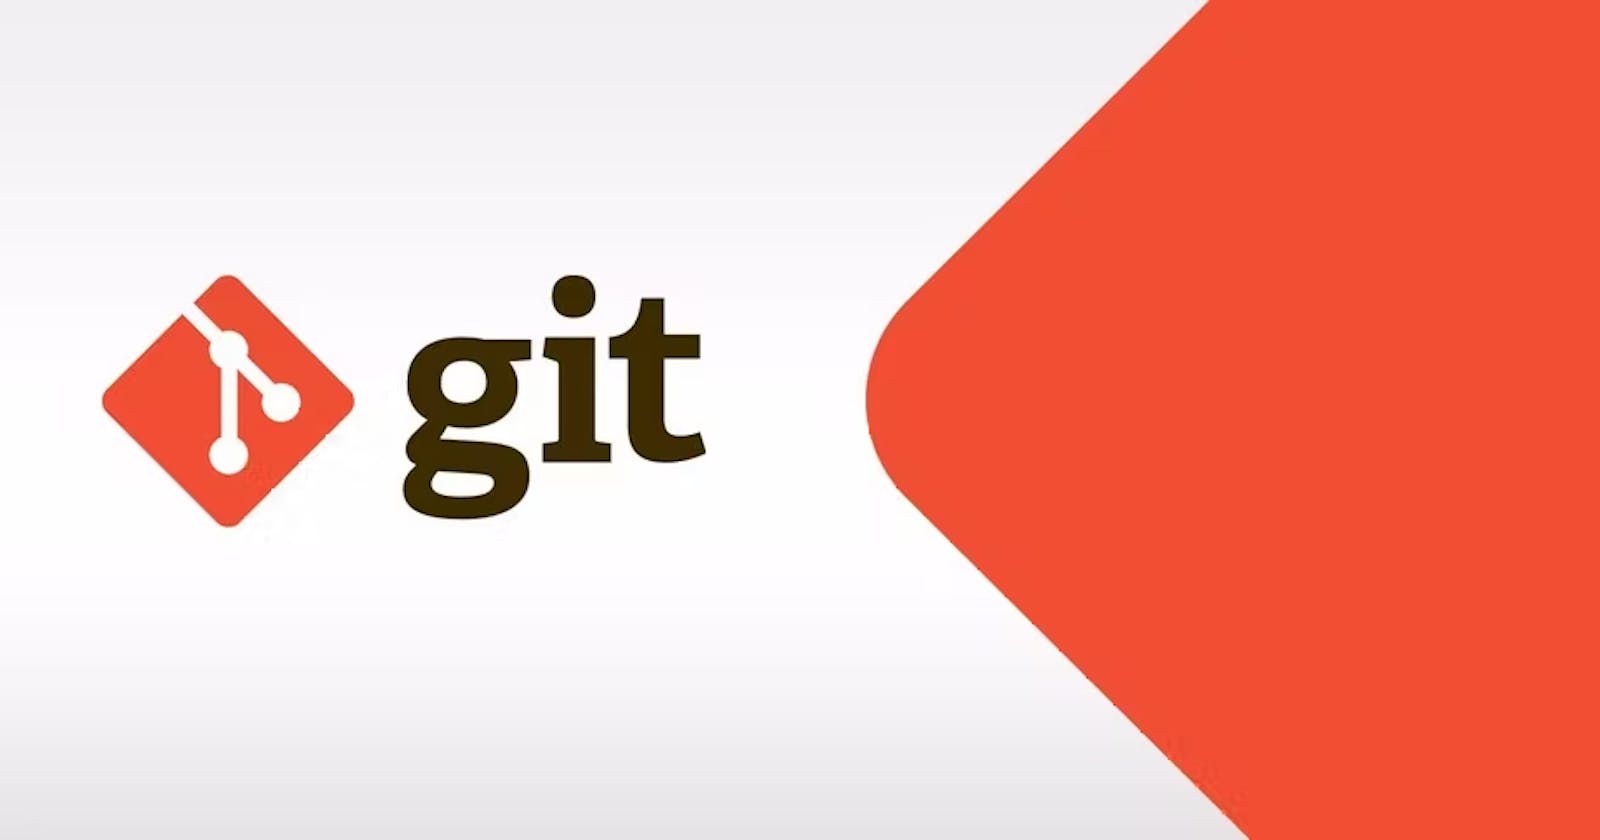 Getting started with Git